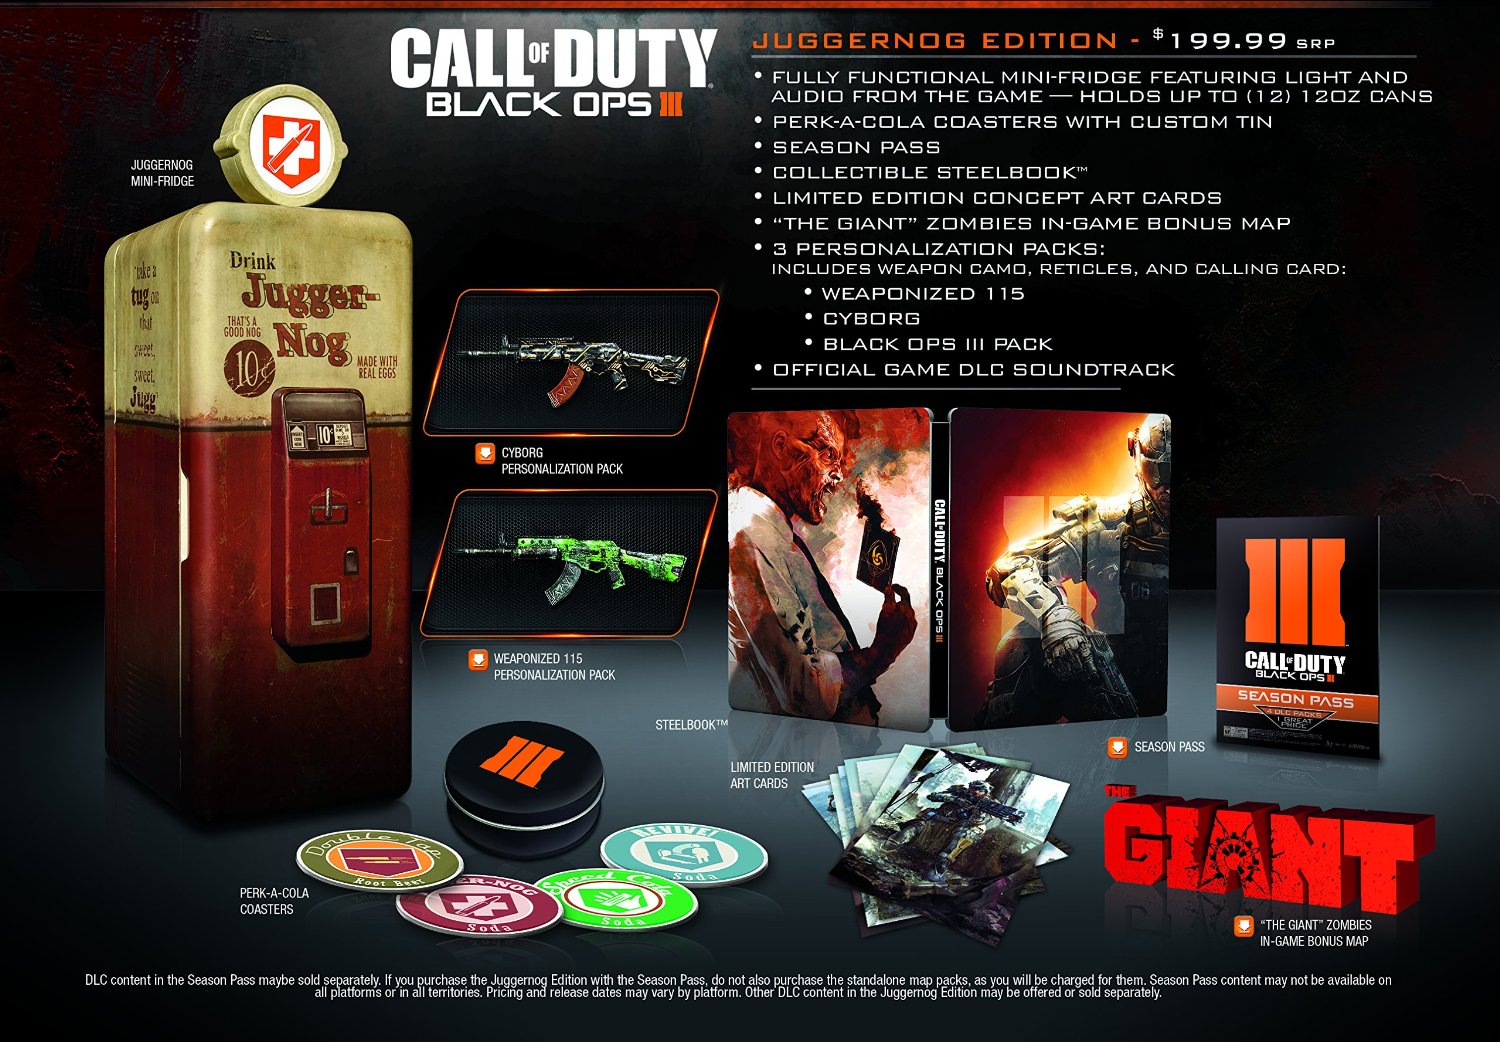 The Call Of Duty Black Ops 3 Juggernog Edition Comes With A Mini Fridge To Keep You Frosty 9to5toys